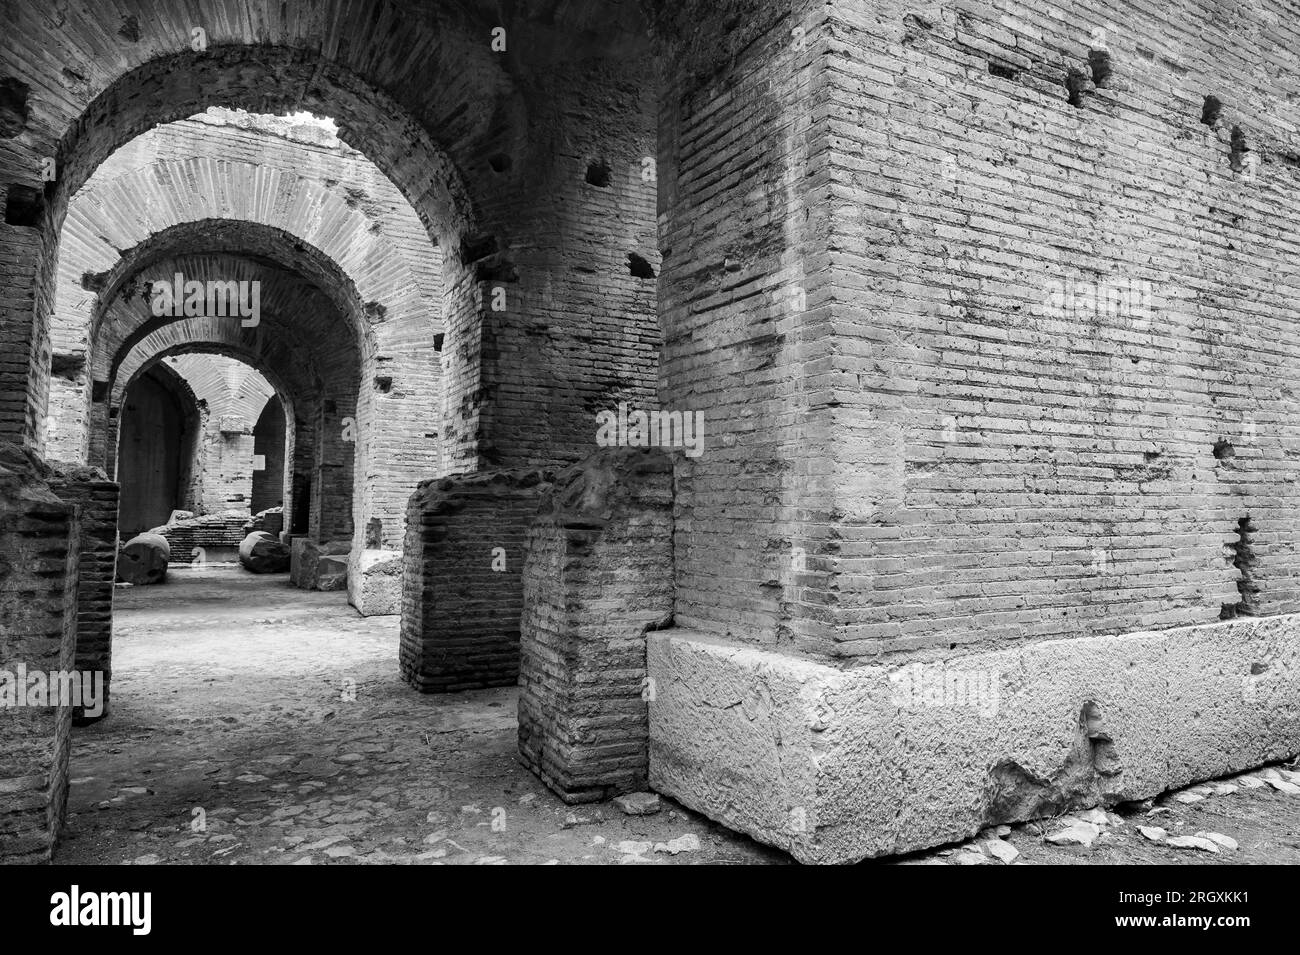 The Campanian Amphitheater is a Roman amphitheater located in the city of Santa Maria Capua Vetere - coinciding with the ancient Capua - second in siz Stock Photo